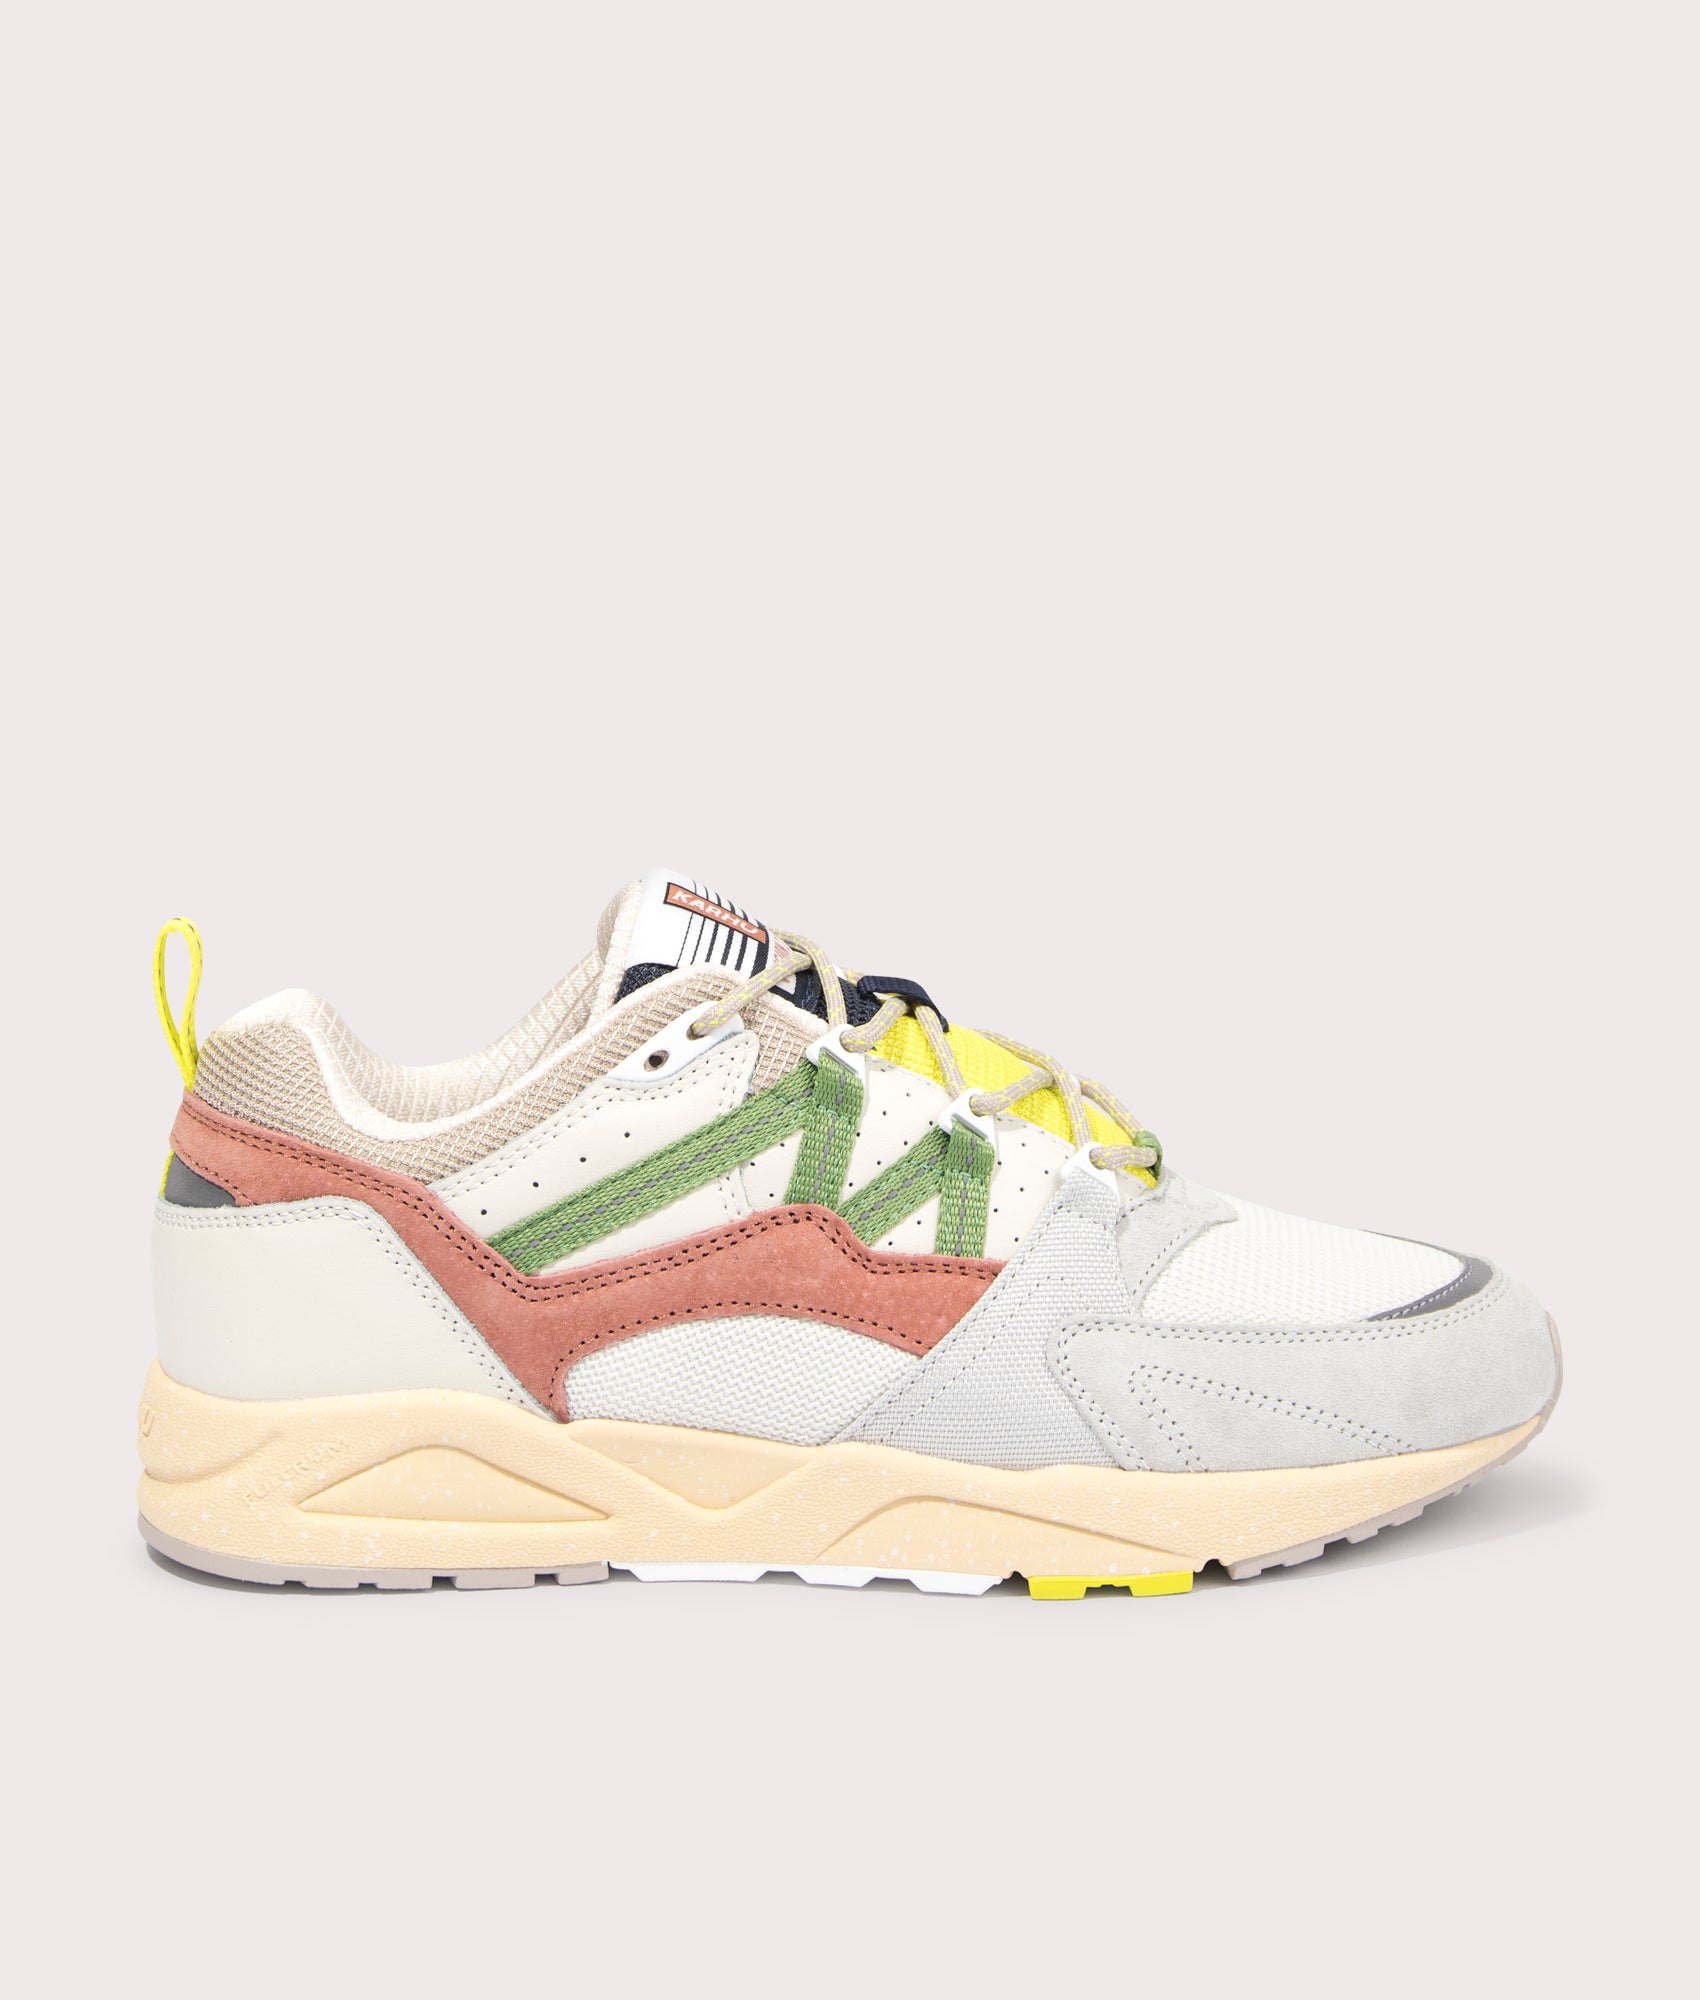 Karhu Mens Fusion 2.0 Sneakers - Colour: Lily White/Piquant Green - Size: 9